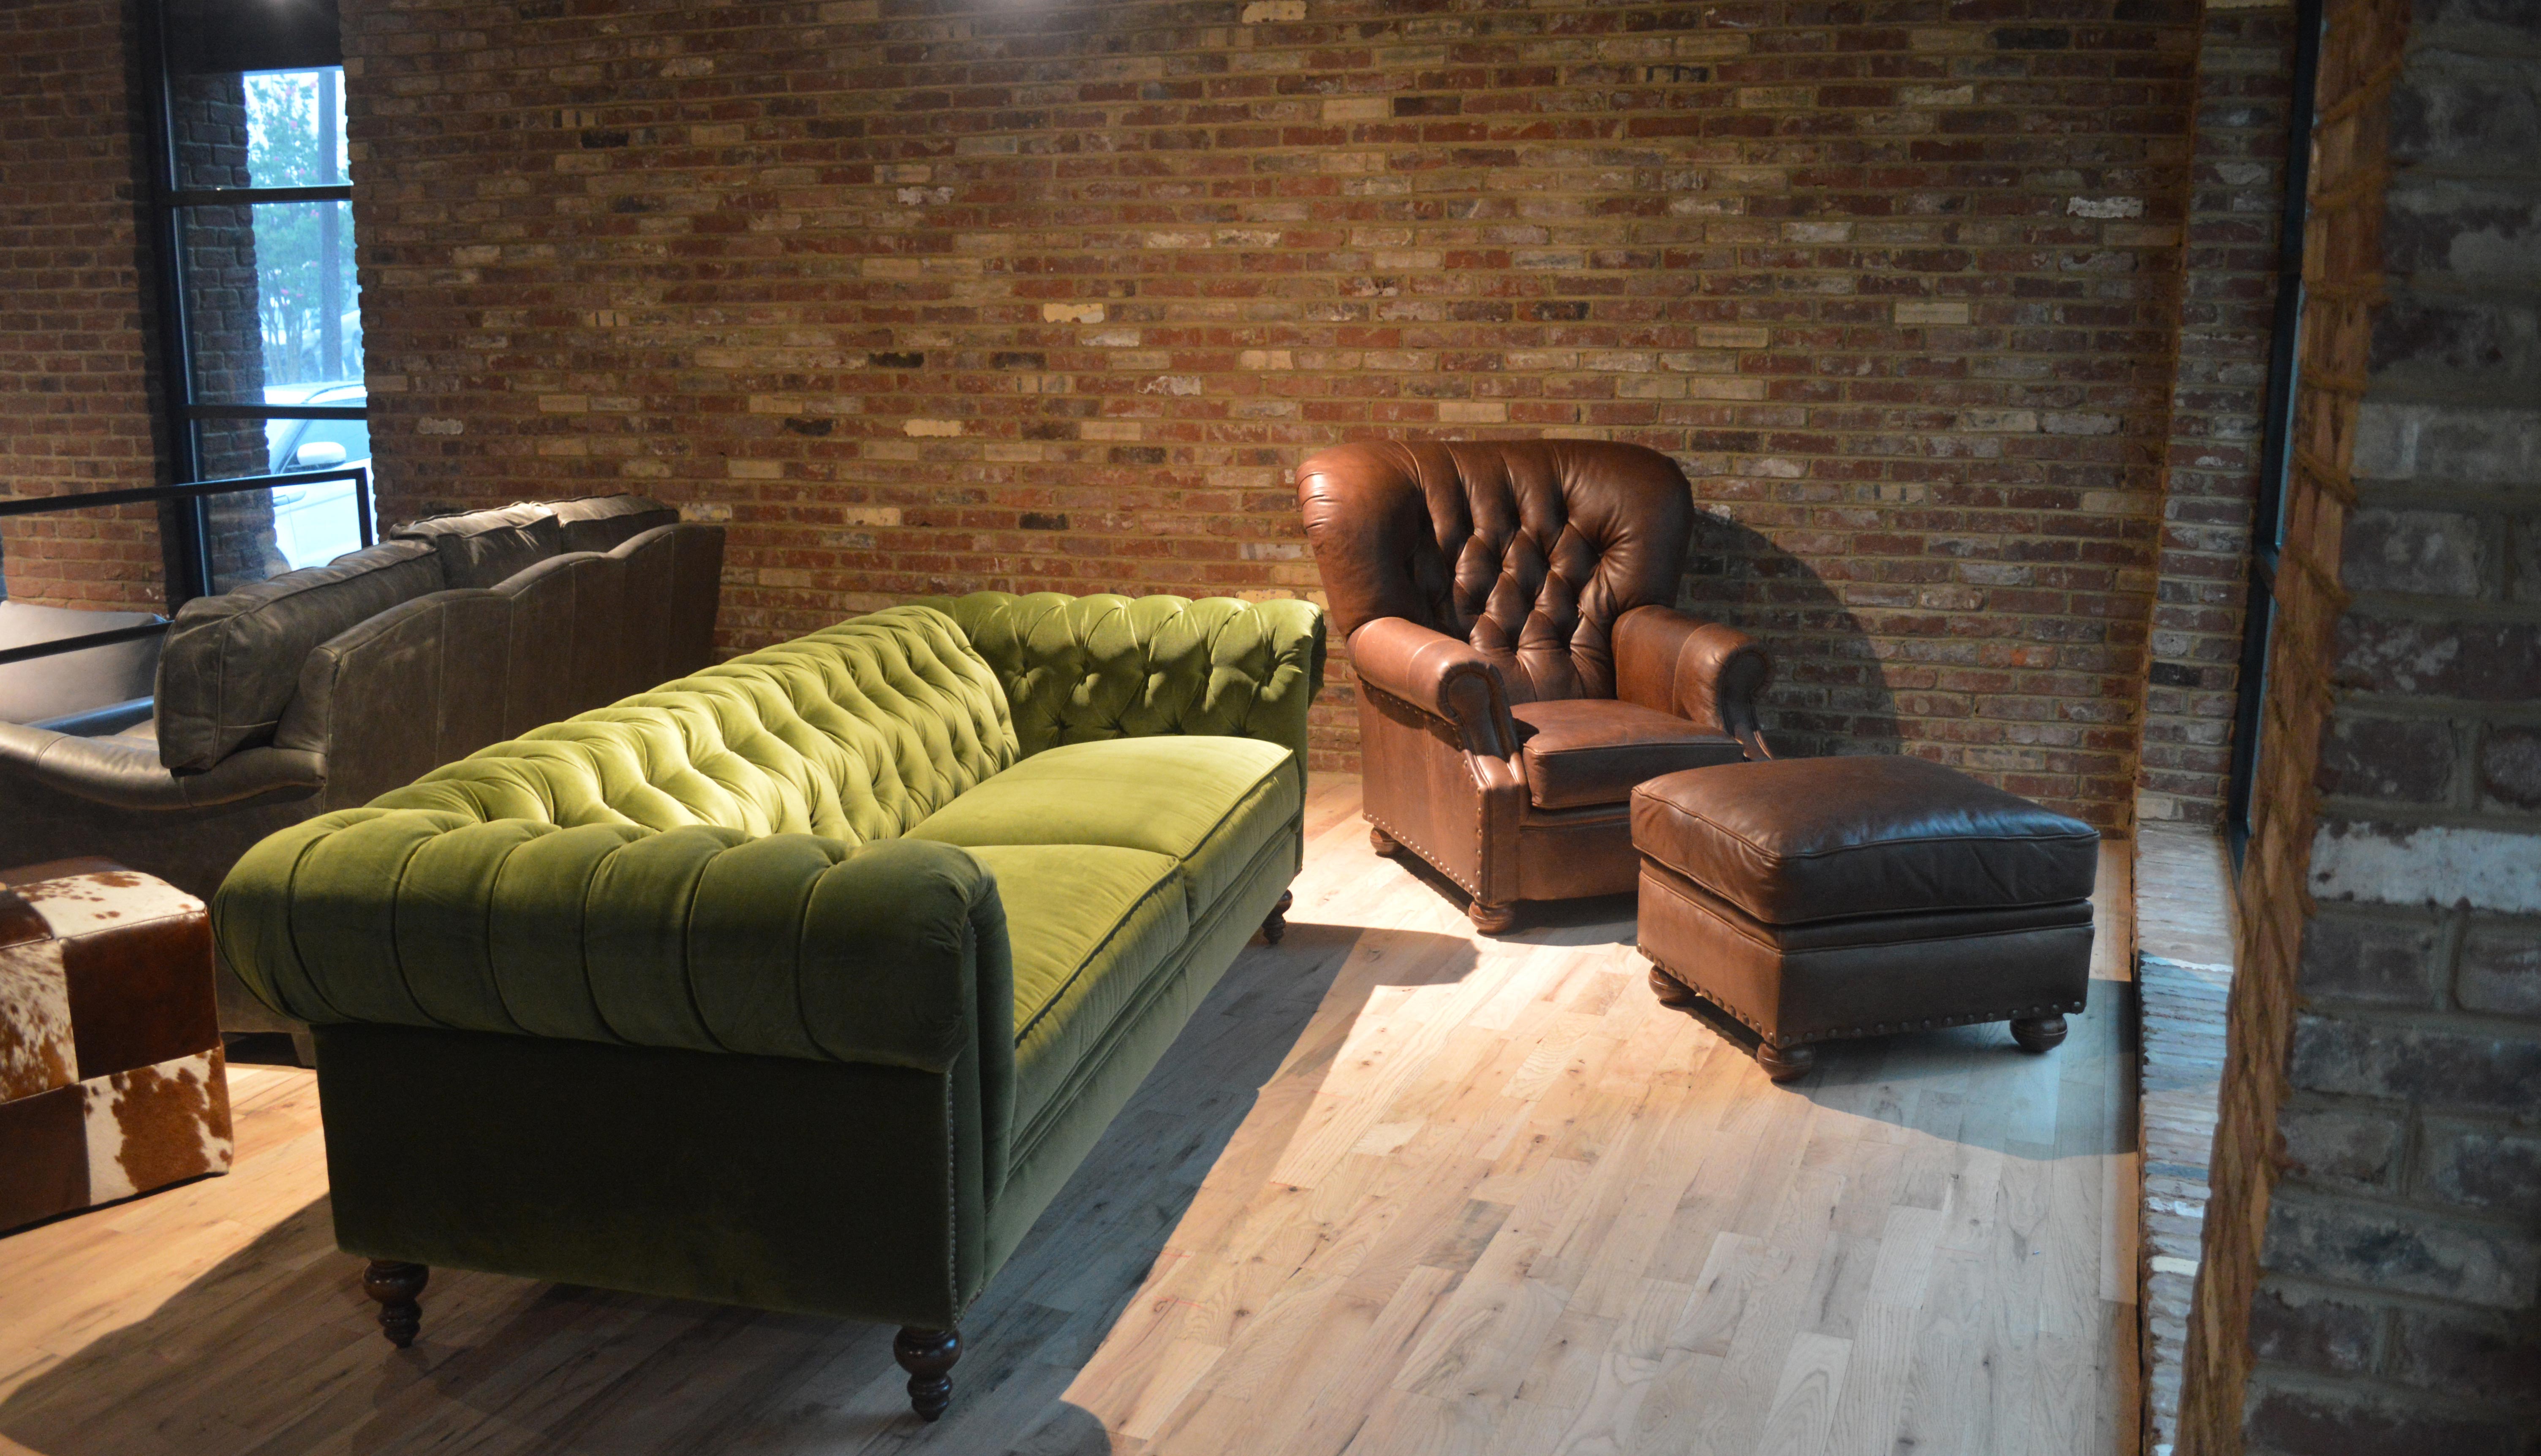 Tufted Chesterfield pieces are a specialty at COCOCO.